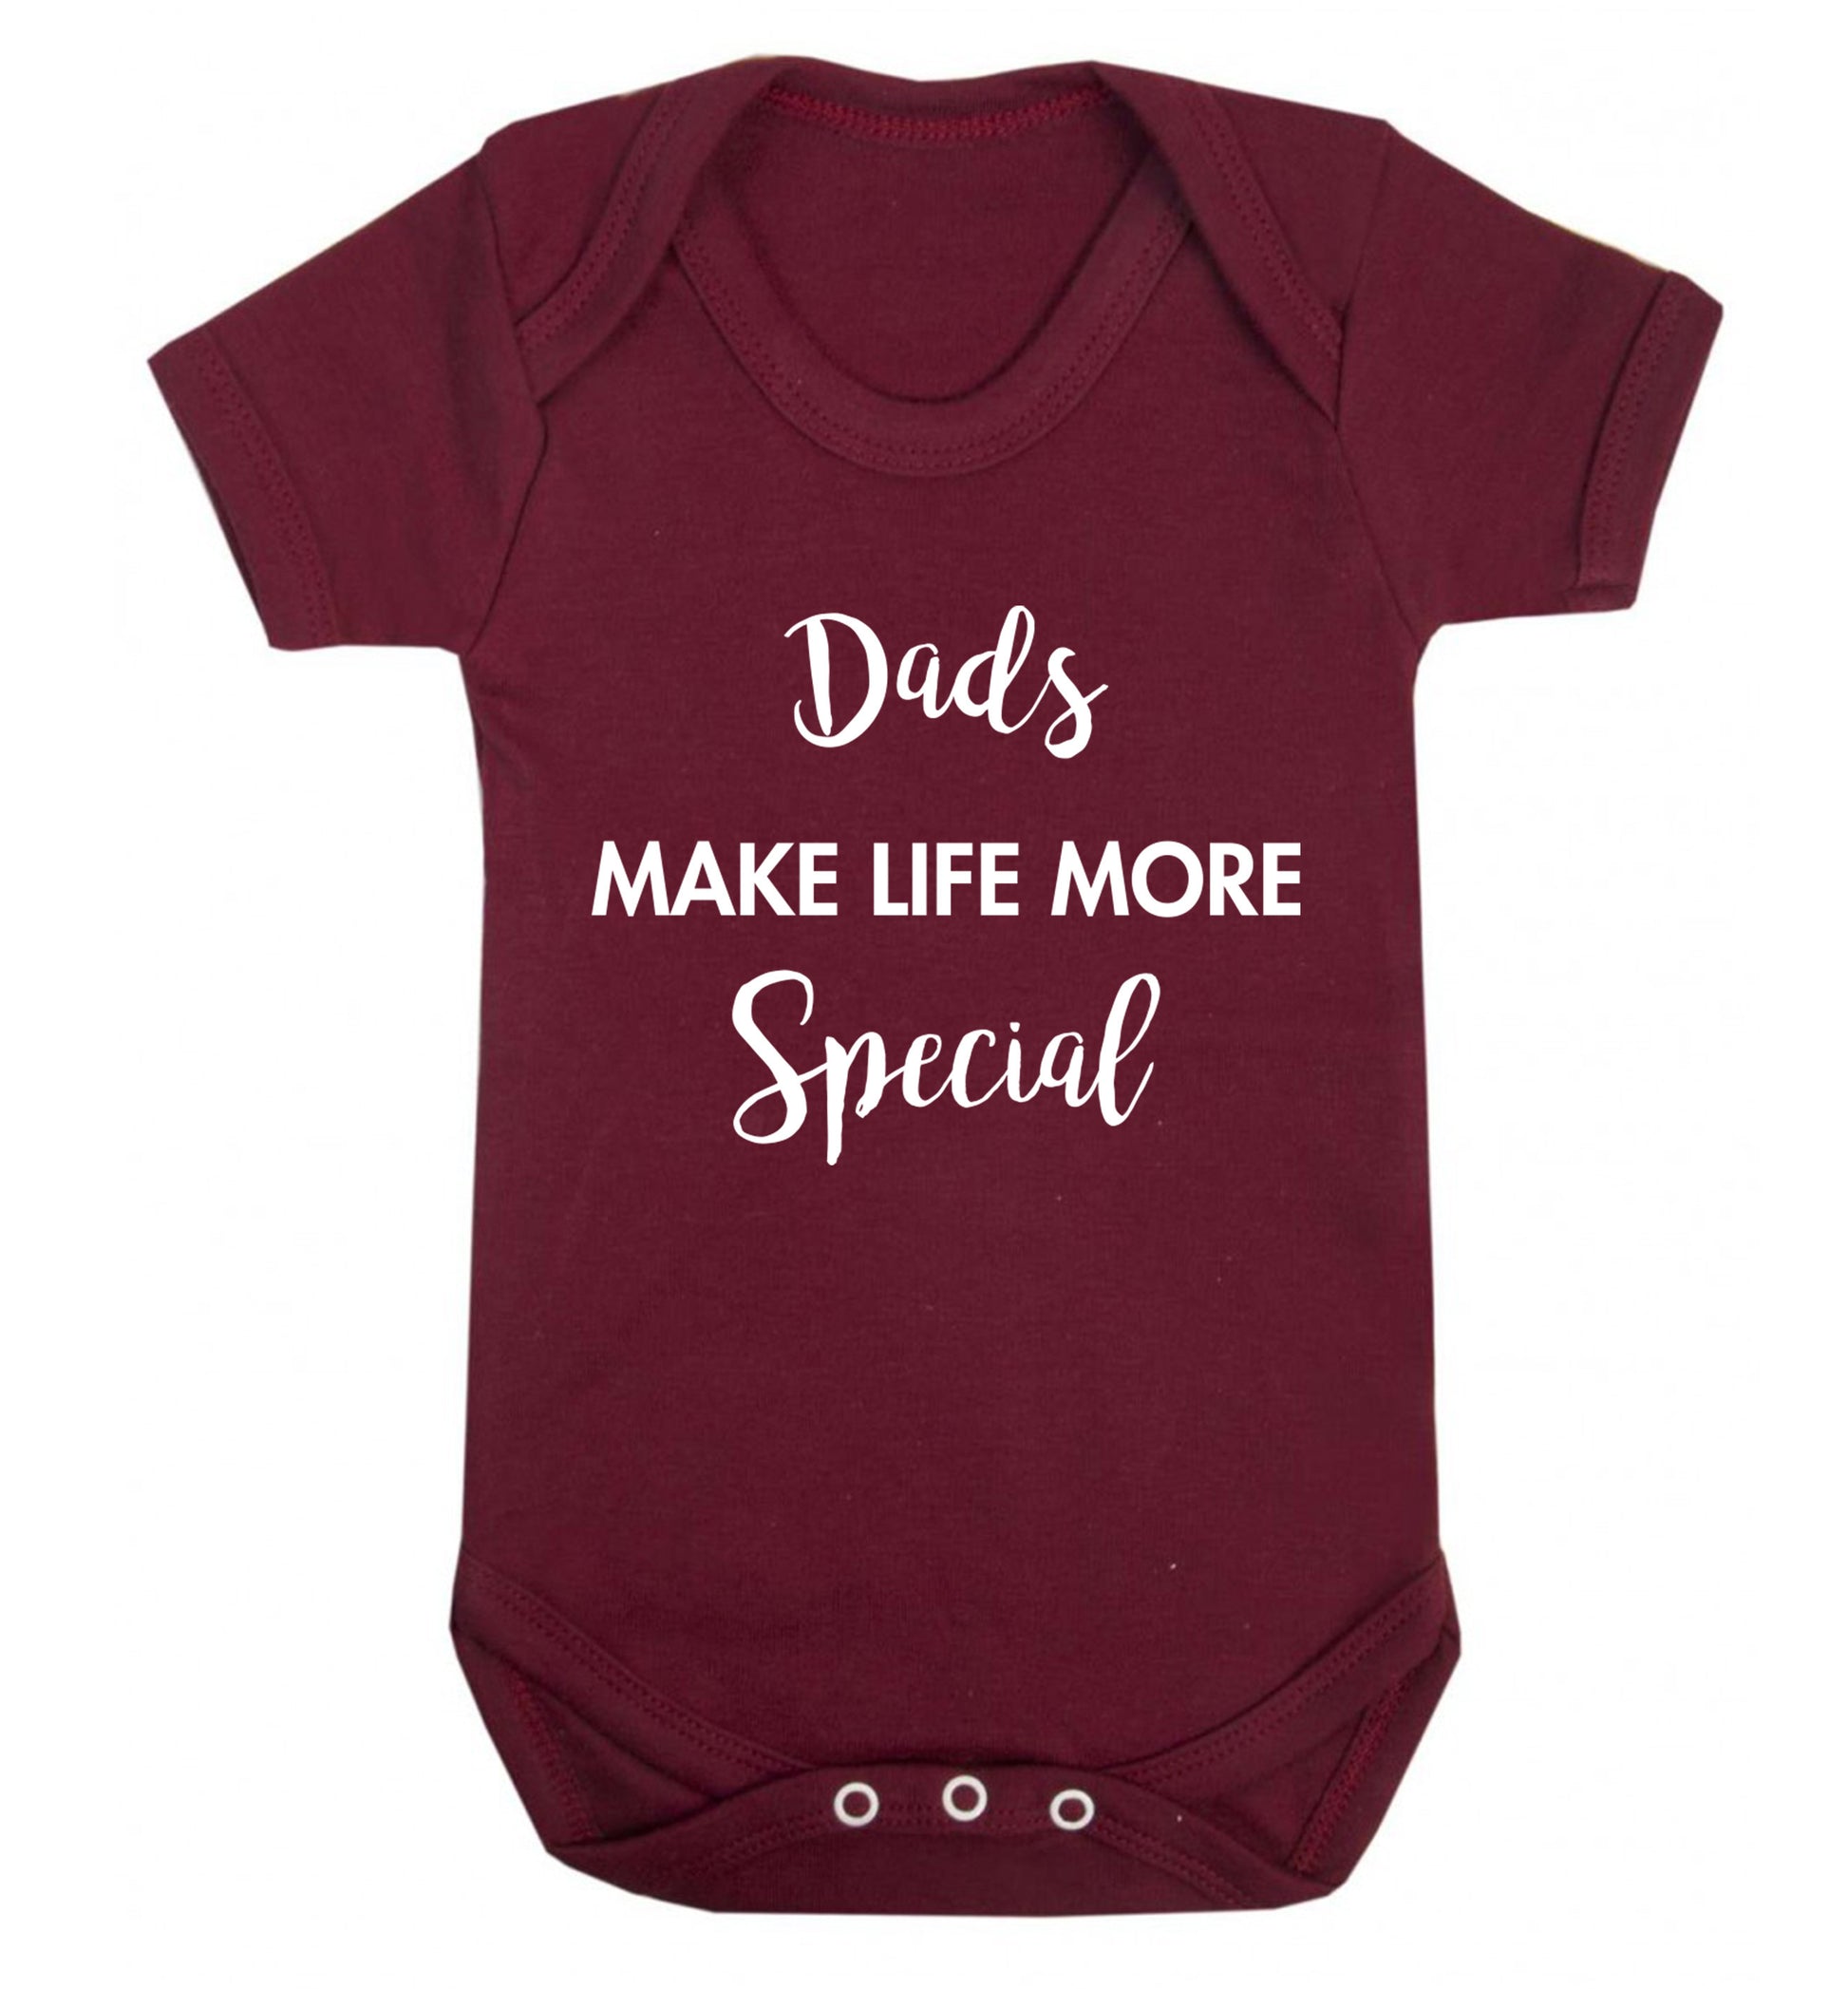 Dads make life more special Baby Vest maroon 18-24 months